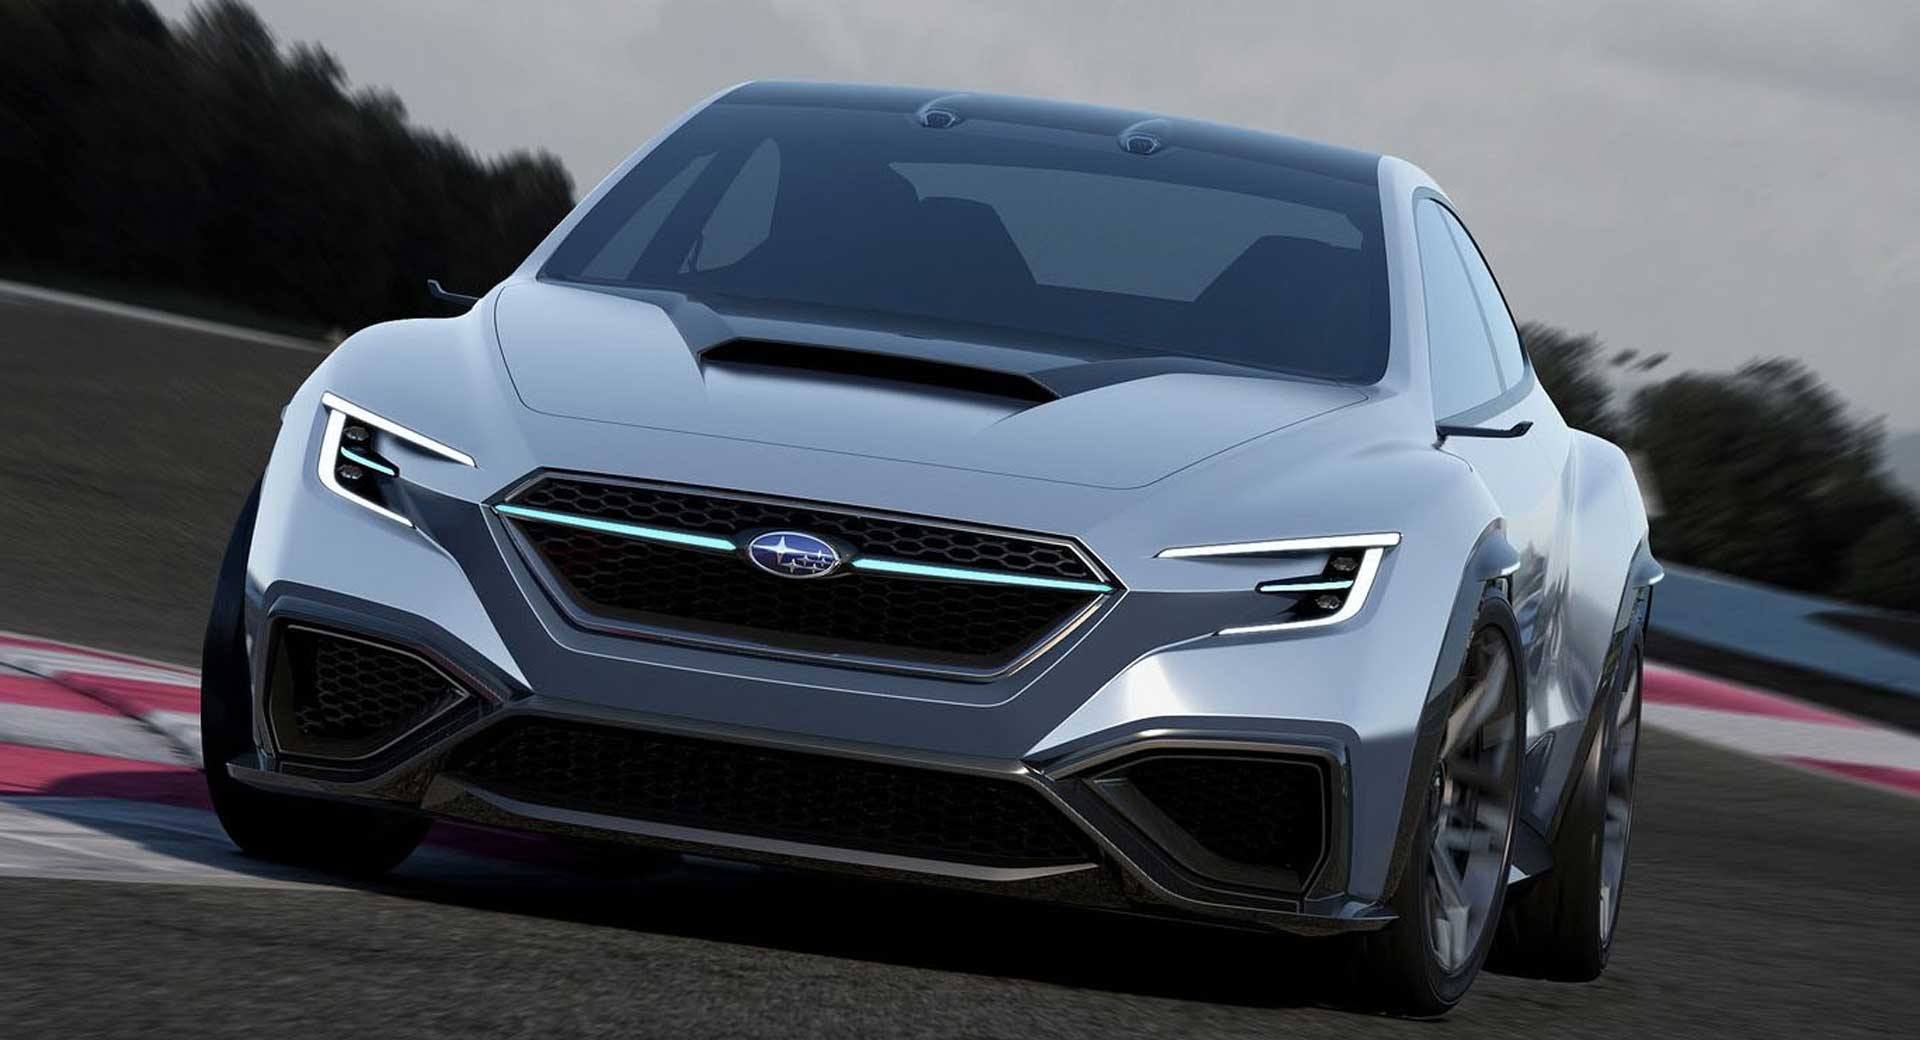 New Hot Hatch Tipped To Pave Subaru's WRC Return